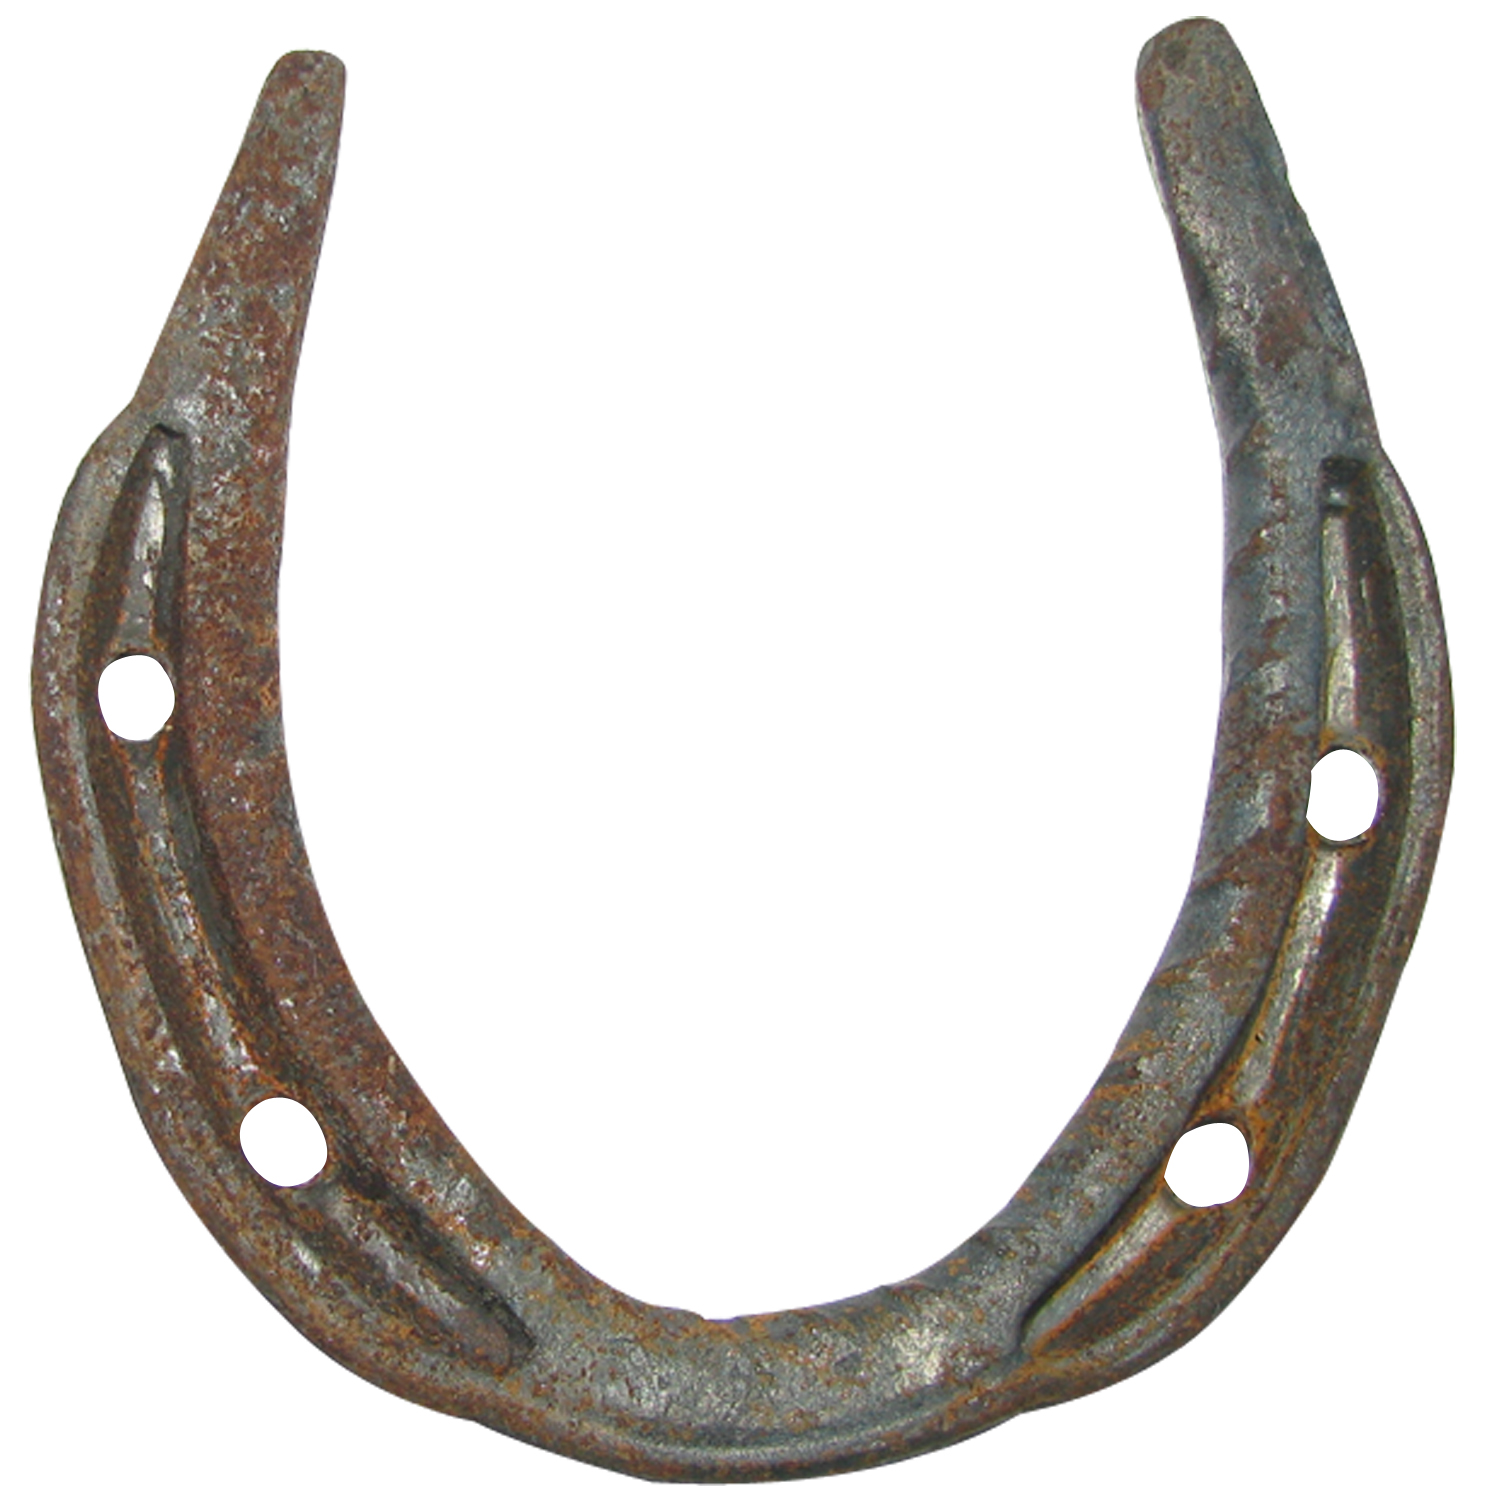 Types Of Horse Shoes